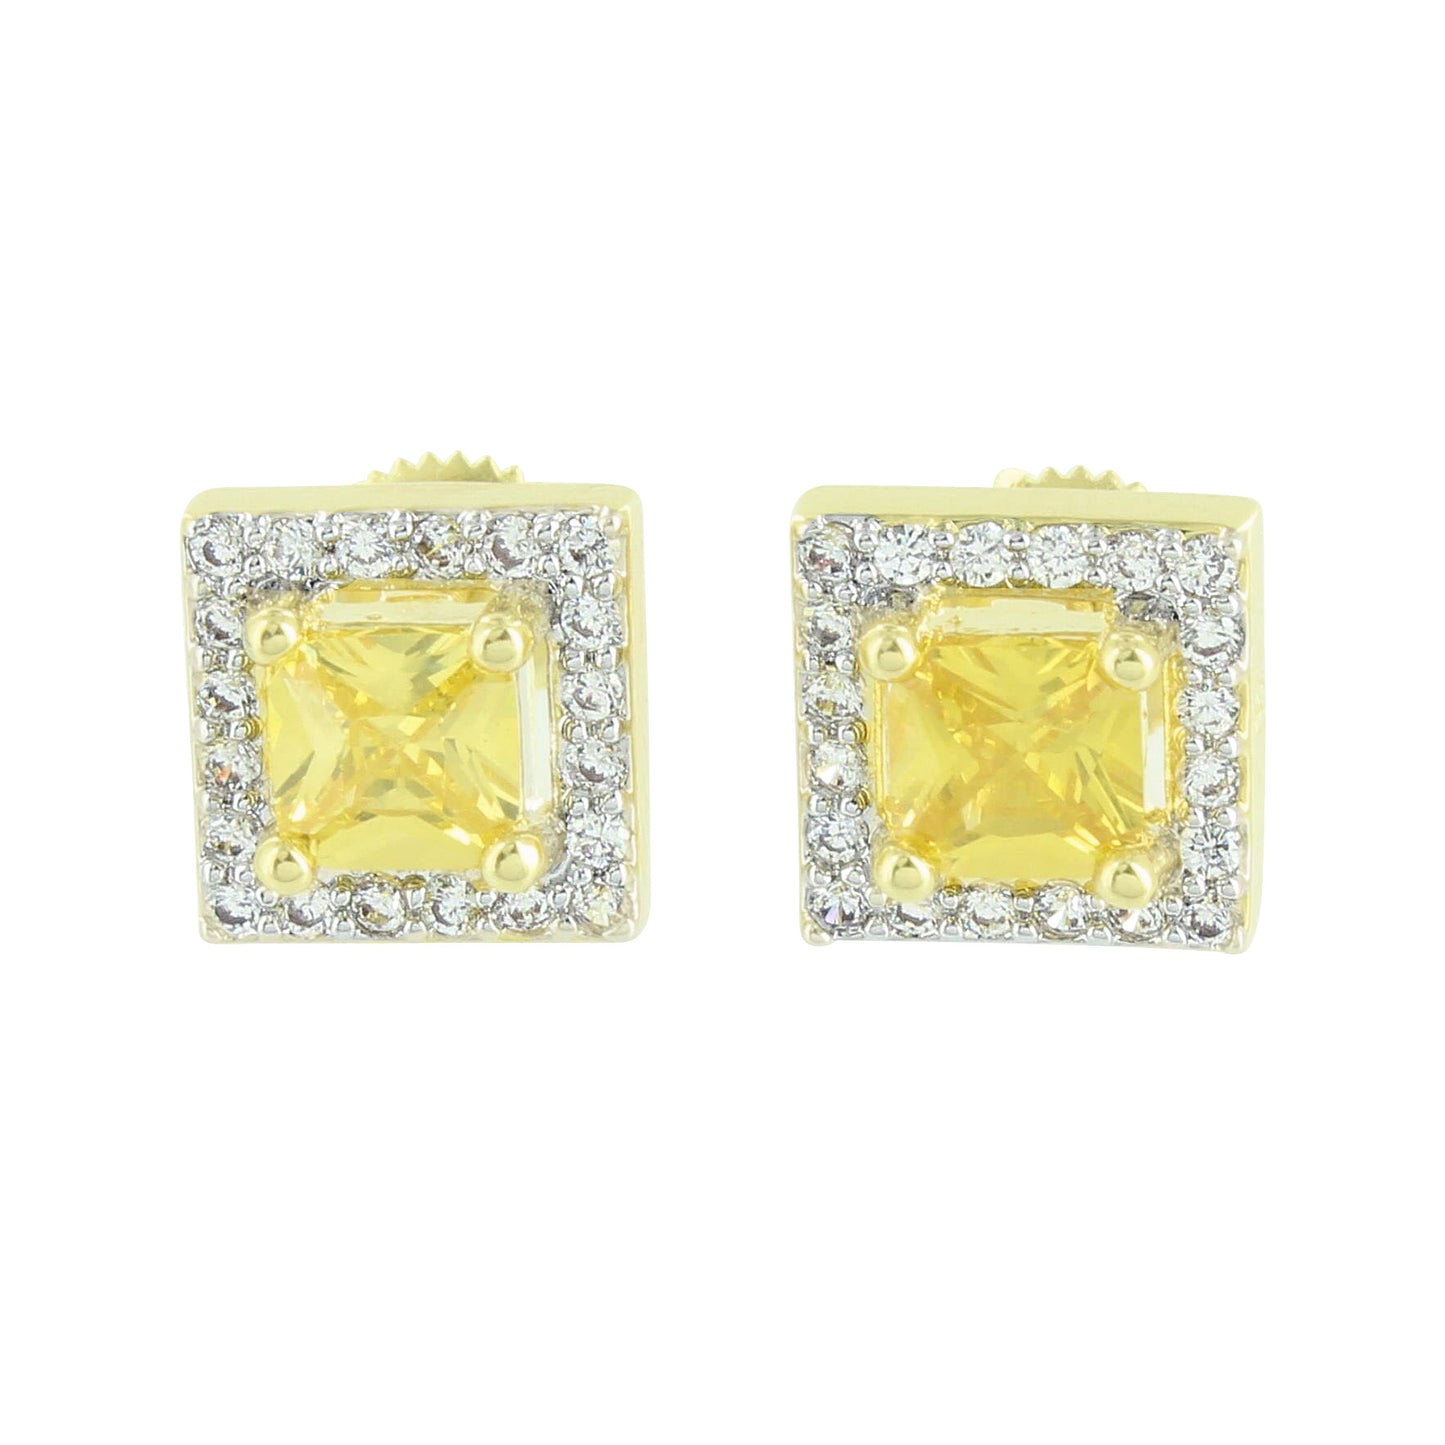 Princess Cut Canary Earrings Solitaire Screw Back Square Lab Diamonds